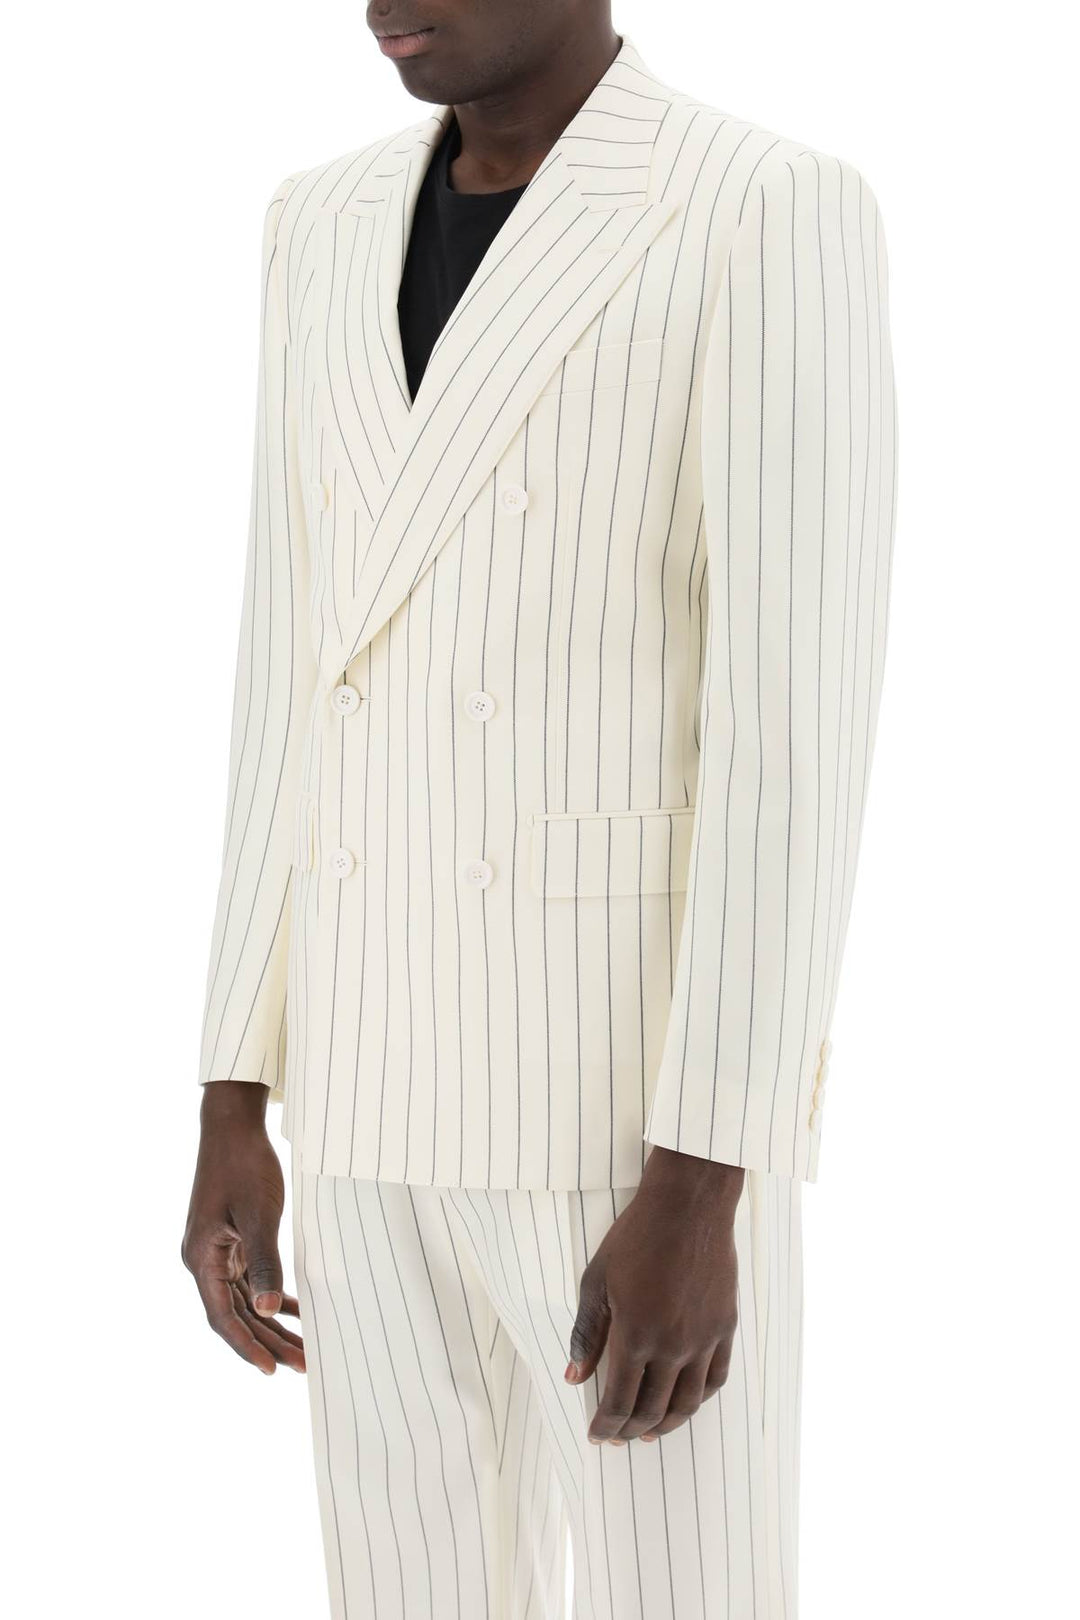 Dolce & Gabbana Double Breasted Pinstripe   Bianco